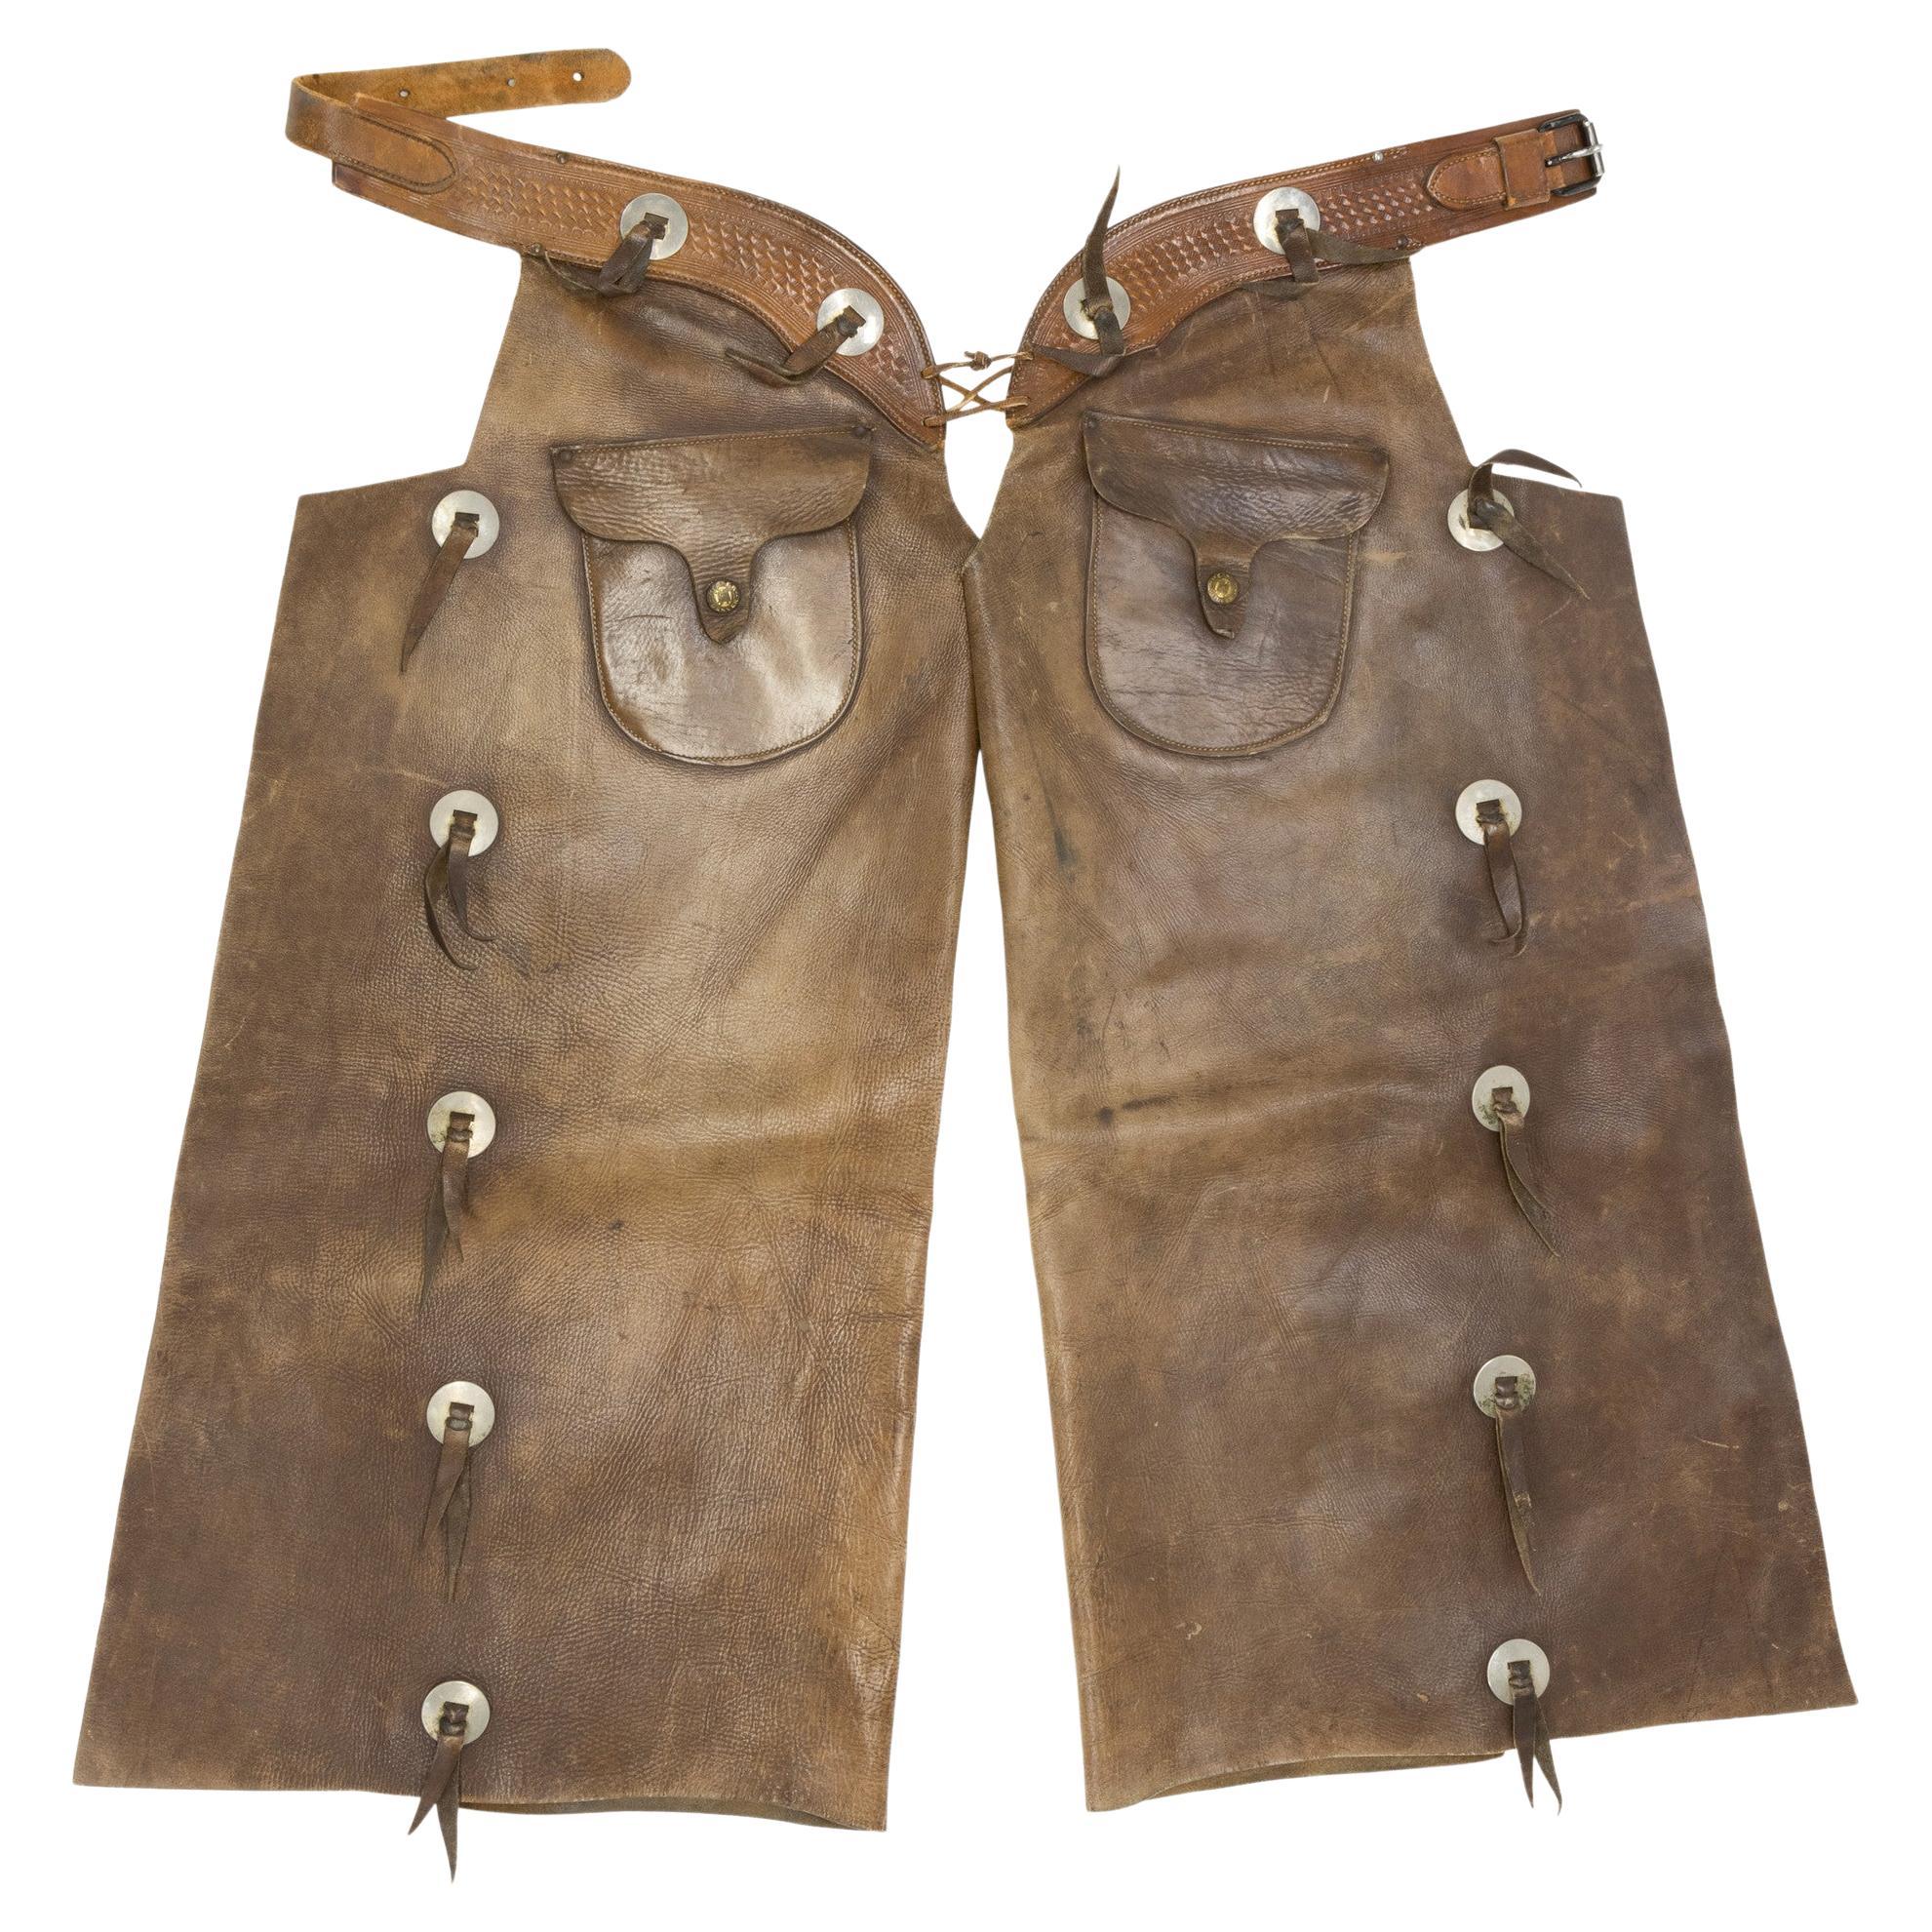 Vintage Leather Heiser Batwing Chaps